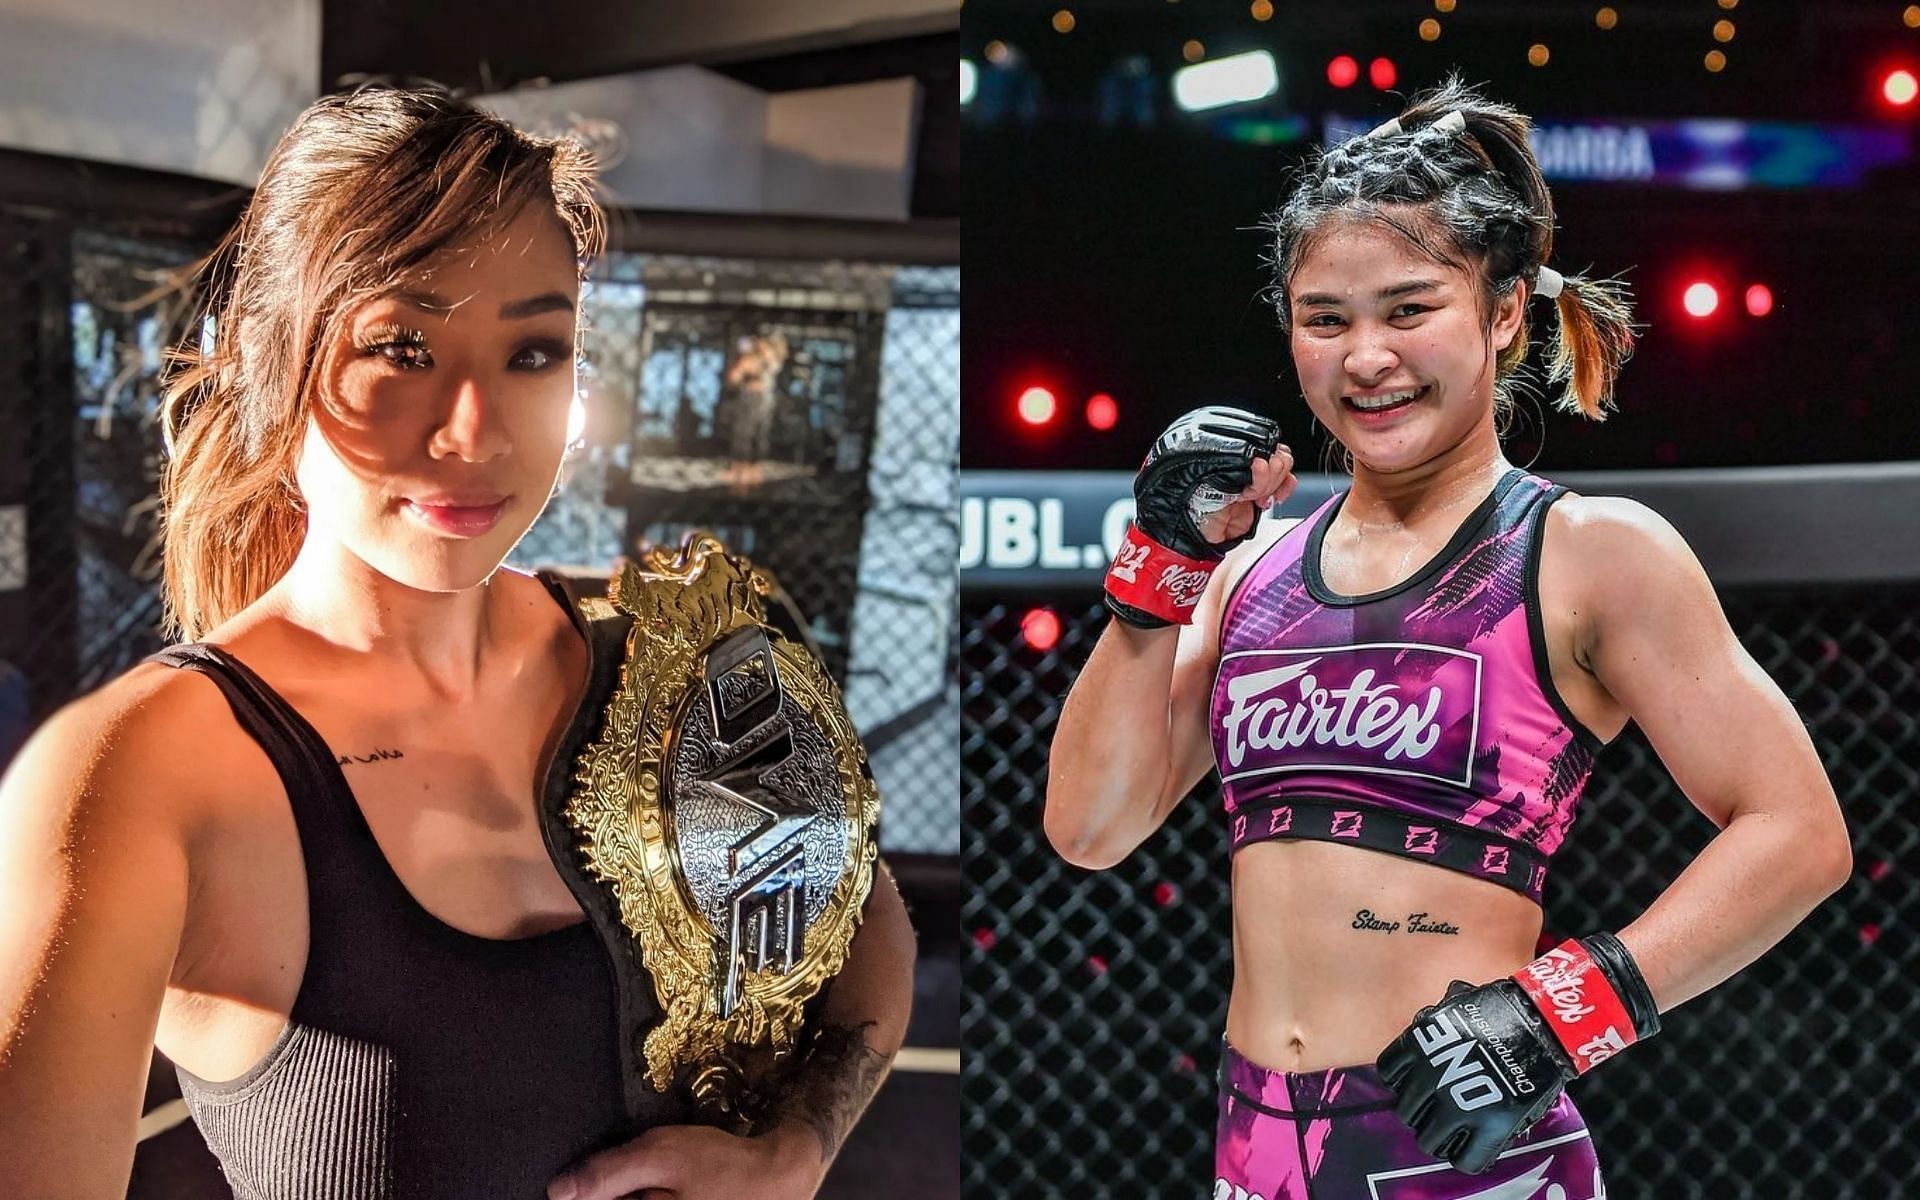 ONE Championship&#039;s atomweight queen Angela Lee continues preparation for ONE X title fight against Stamp Fairtex. [Photos: @angelaleemma, @stamp_fairtex on Instagram]